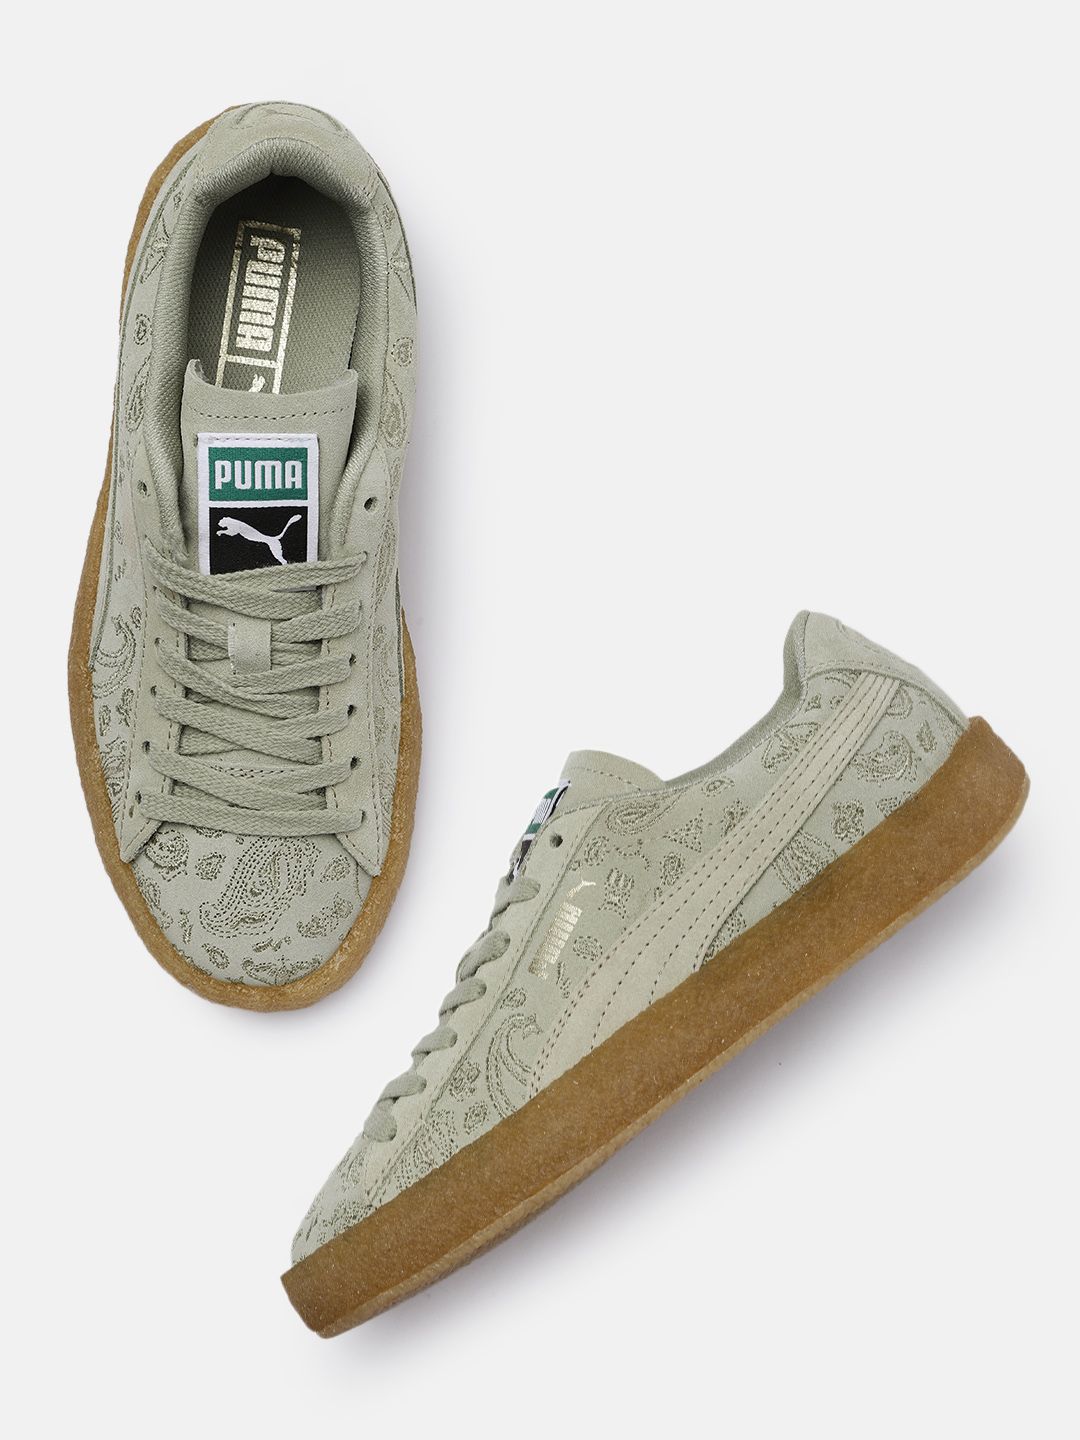 Puma Unisex Sage Green Embroidered Leather Sneakers Price in India